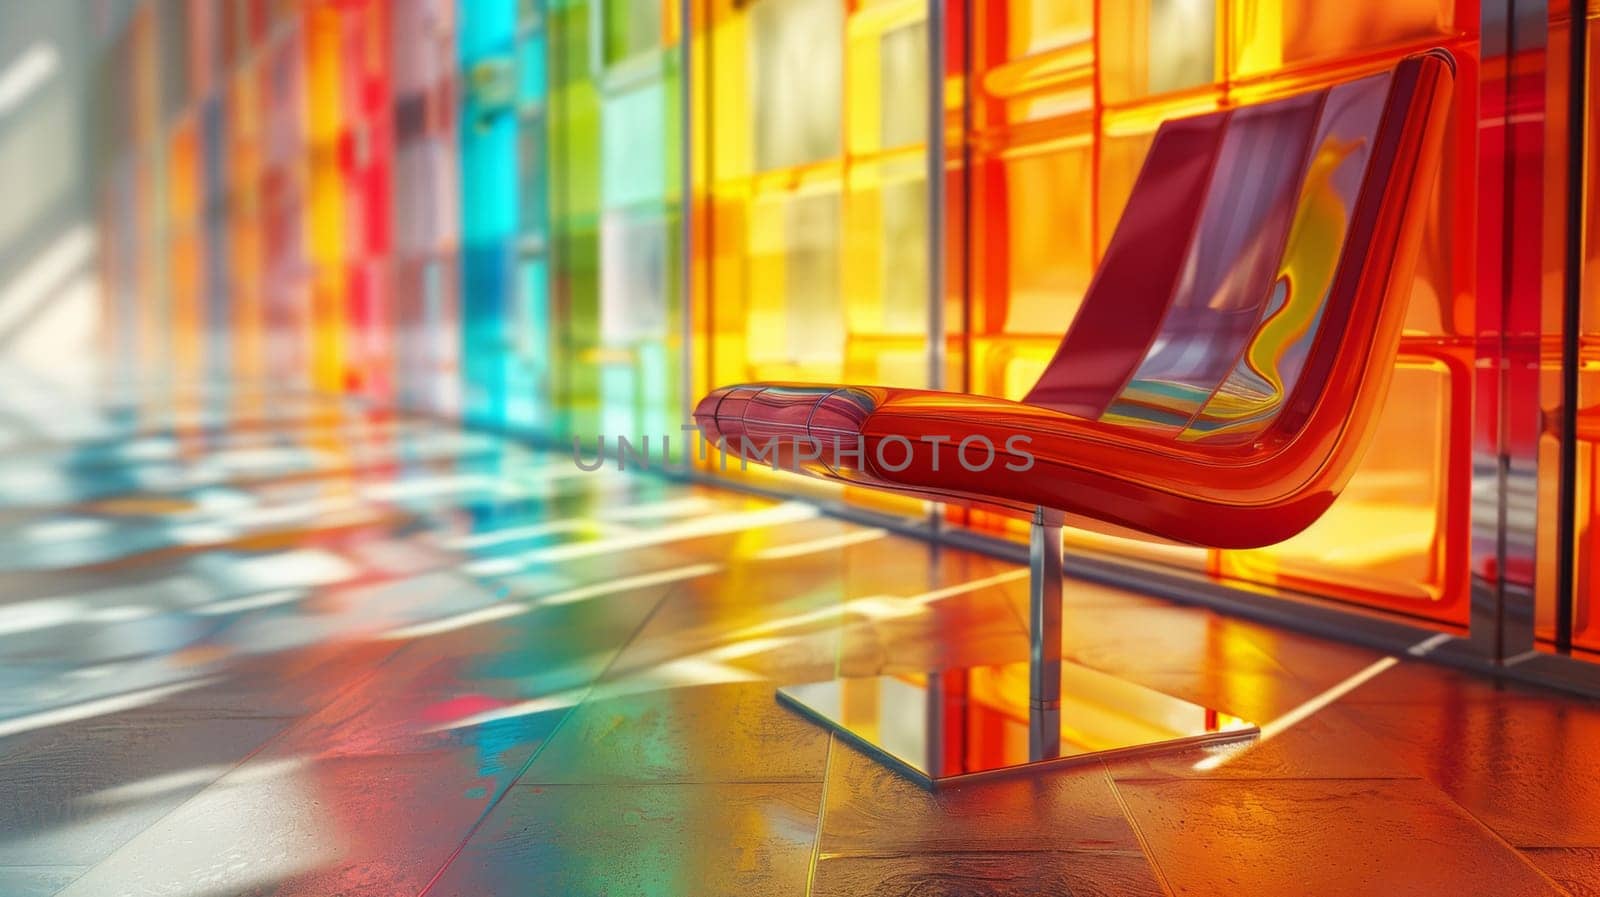 A chair sitting on a shiny metal surface in front of colorful glass